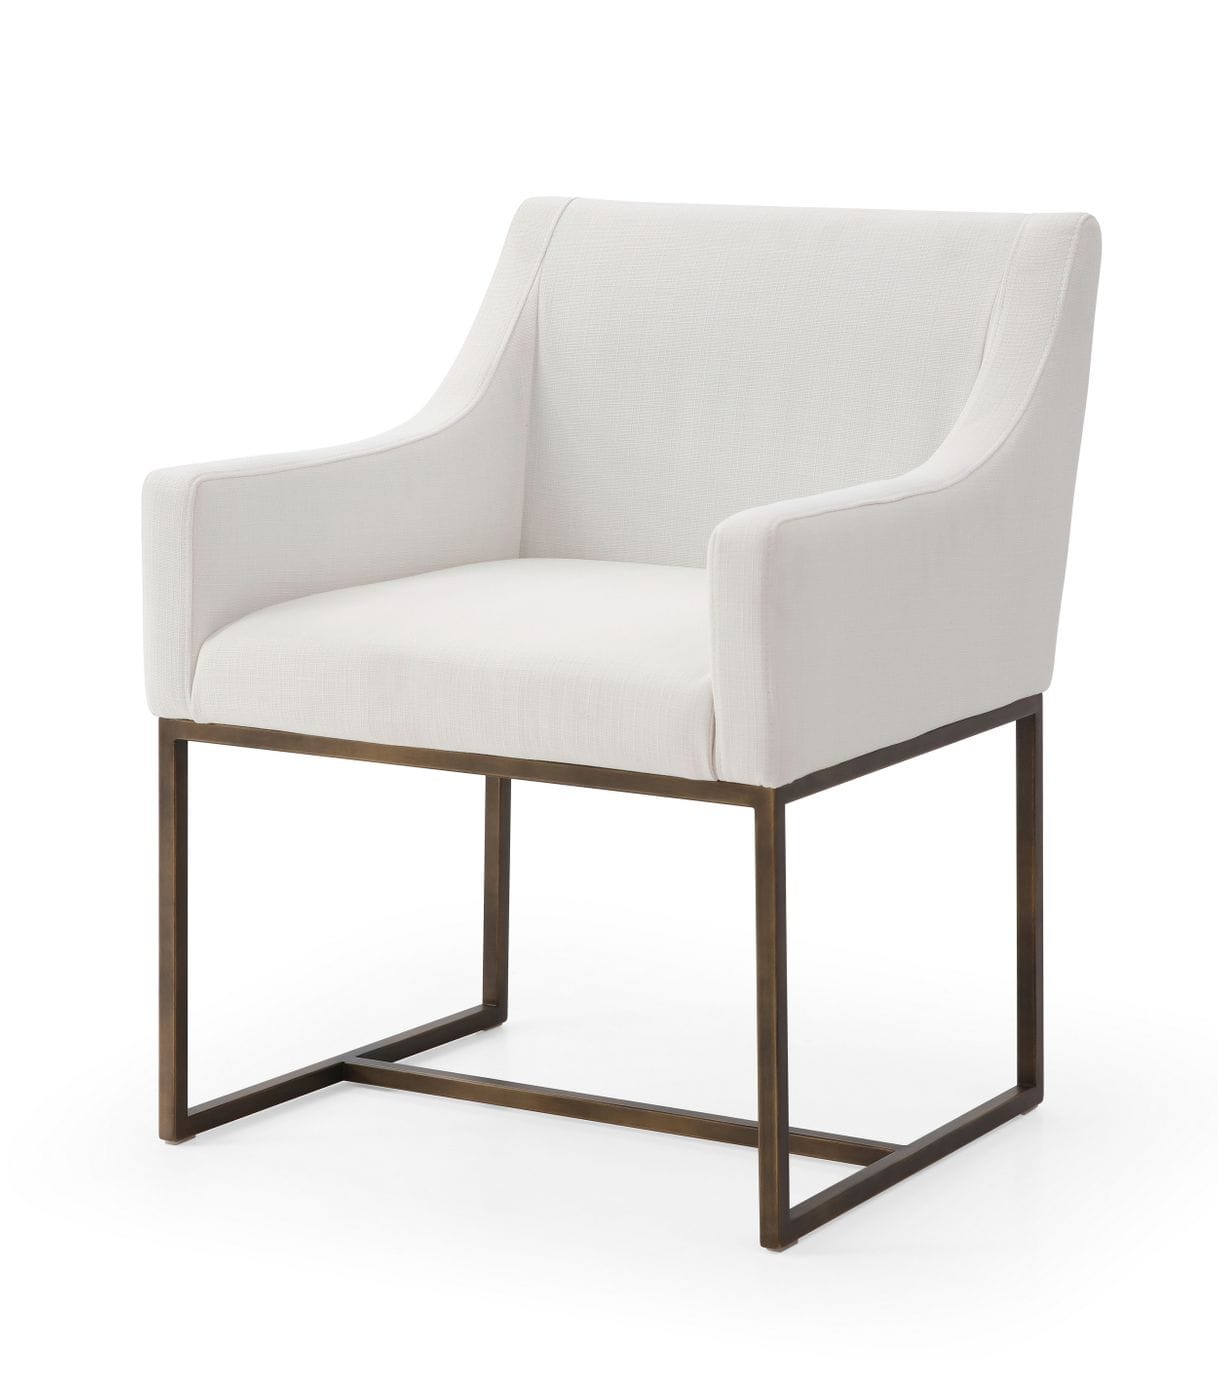 Modrest Elijah - Modern Off White & Copper Antique Brass Dining Chair-Dining Chair-VIG-Wall2Wall Furnishings